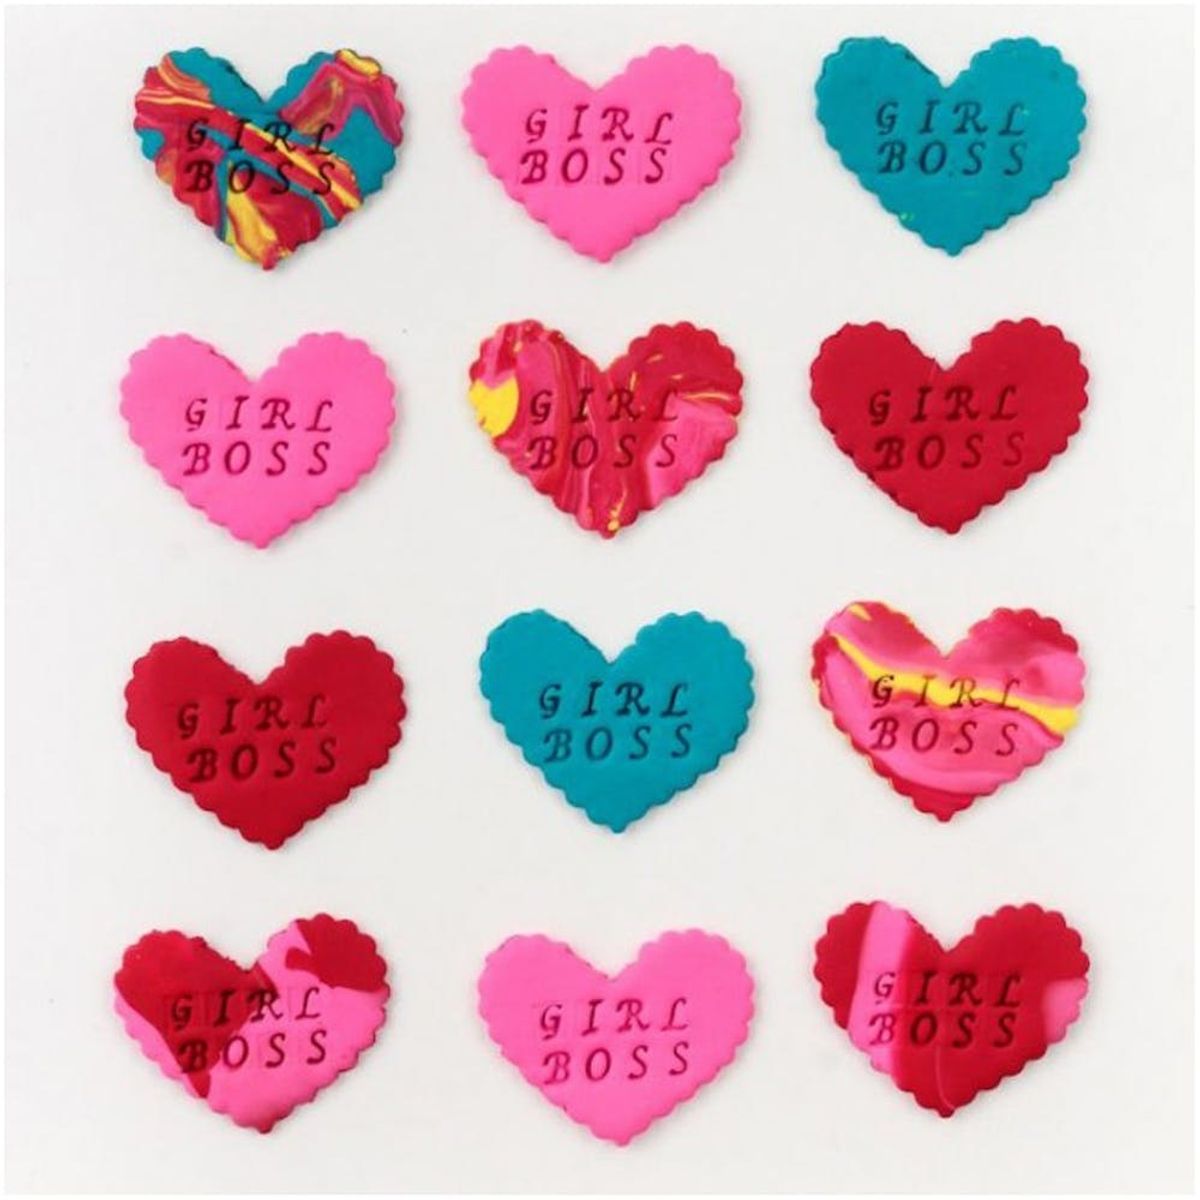 11 Ways to Host a DIY-Themed Galentine’s Day